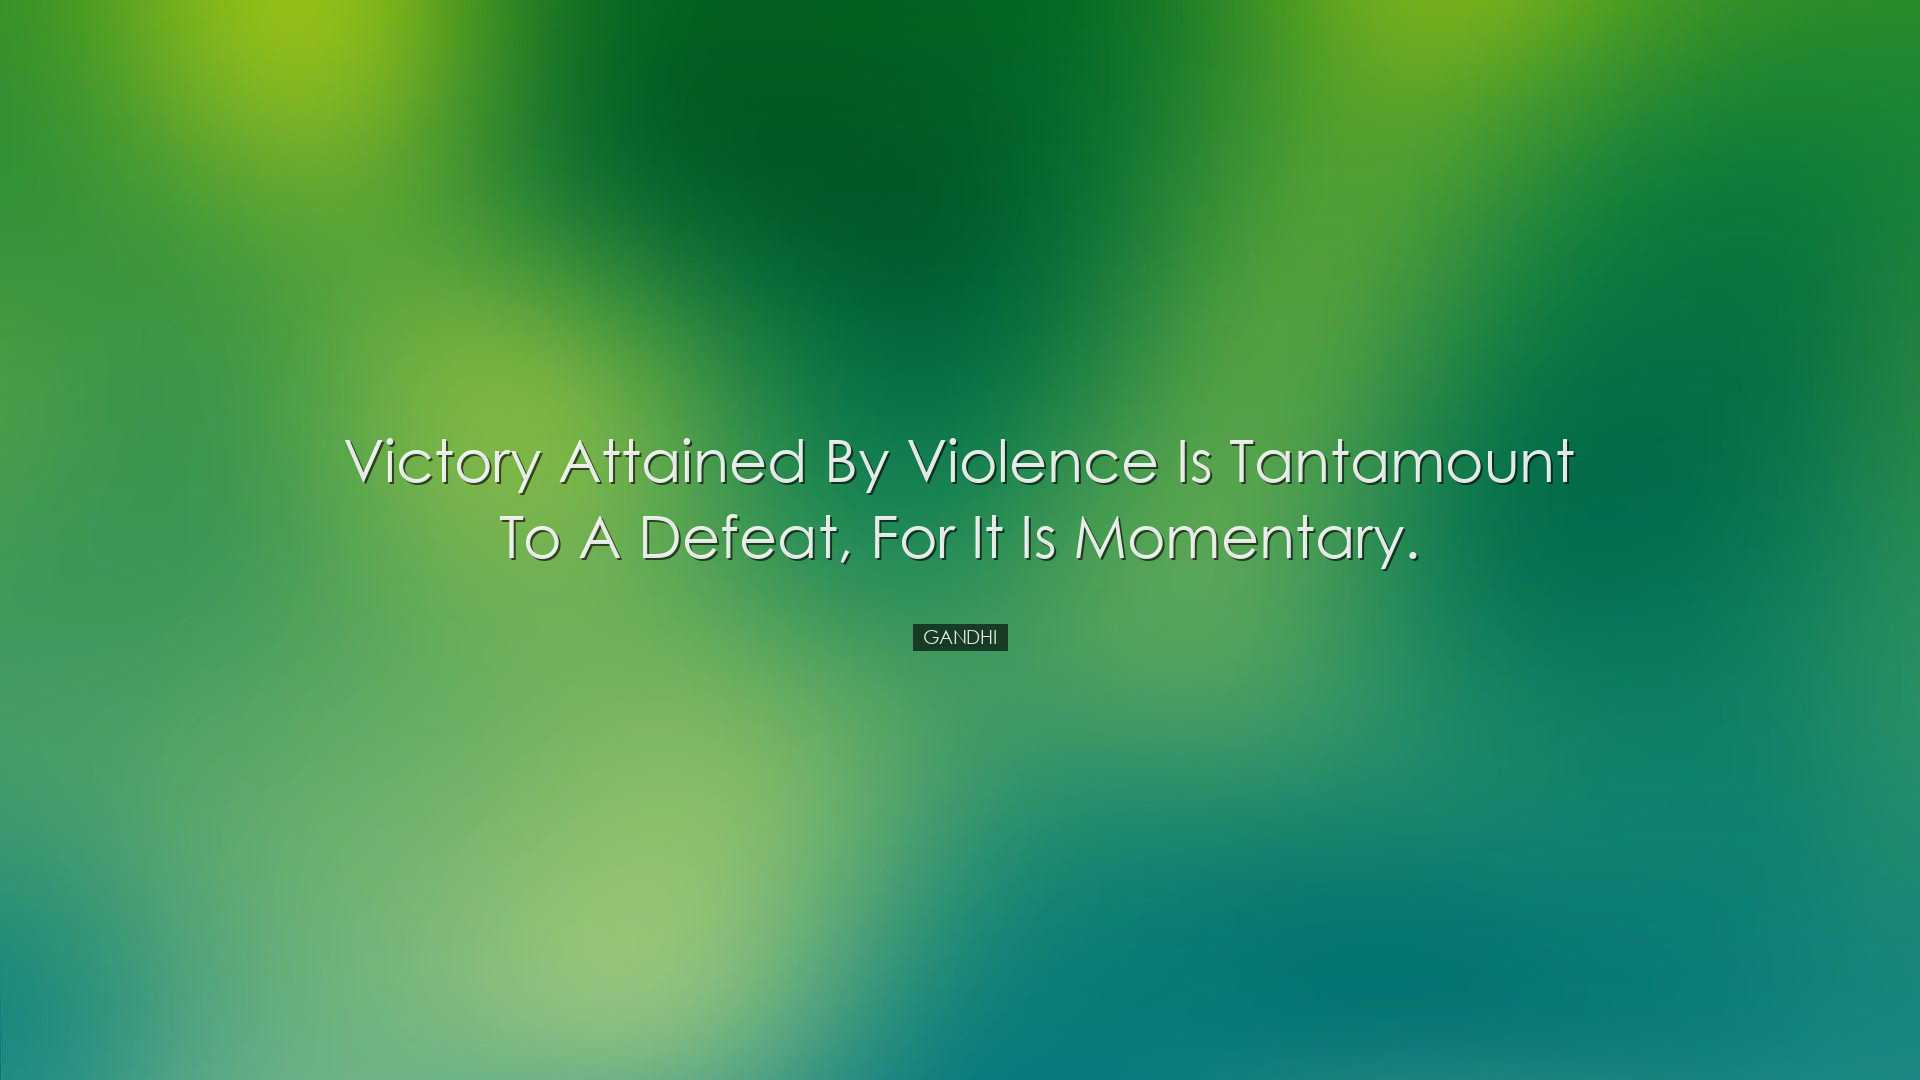 Victory attained by violence is tantamount to a defeat, for it is